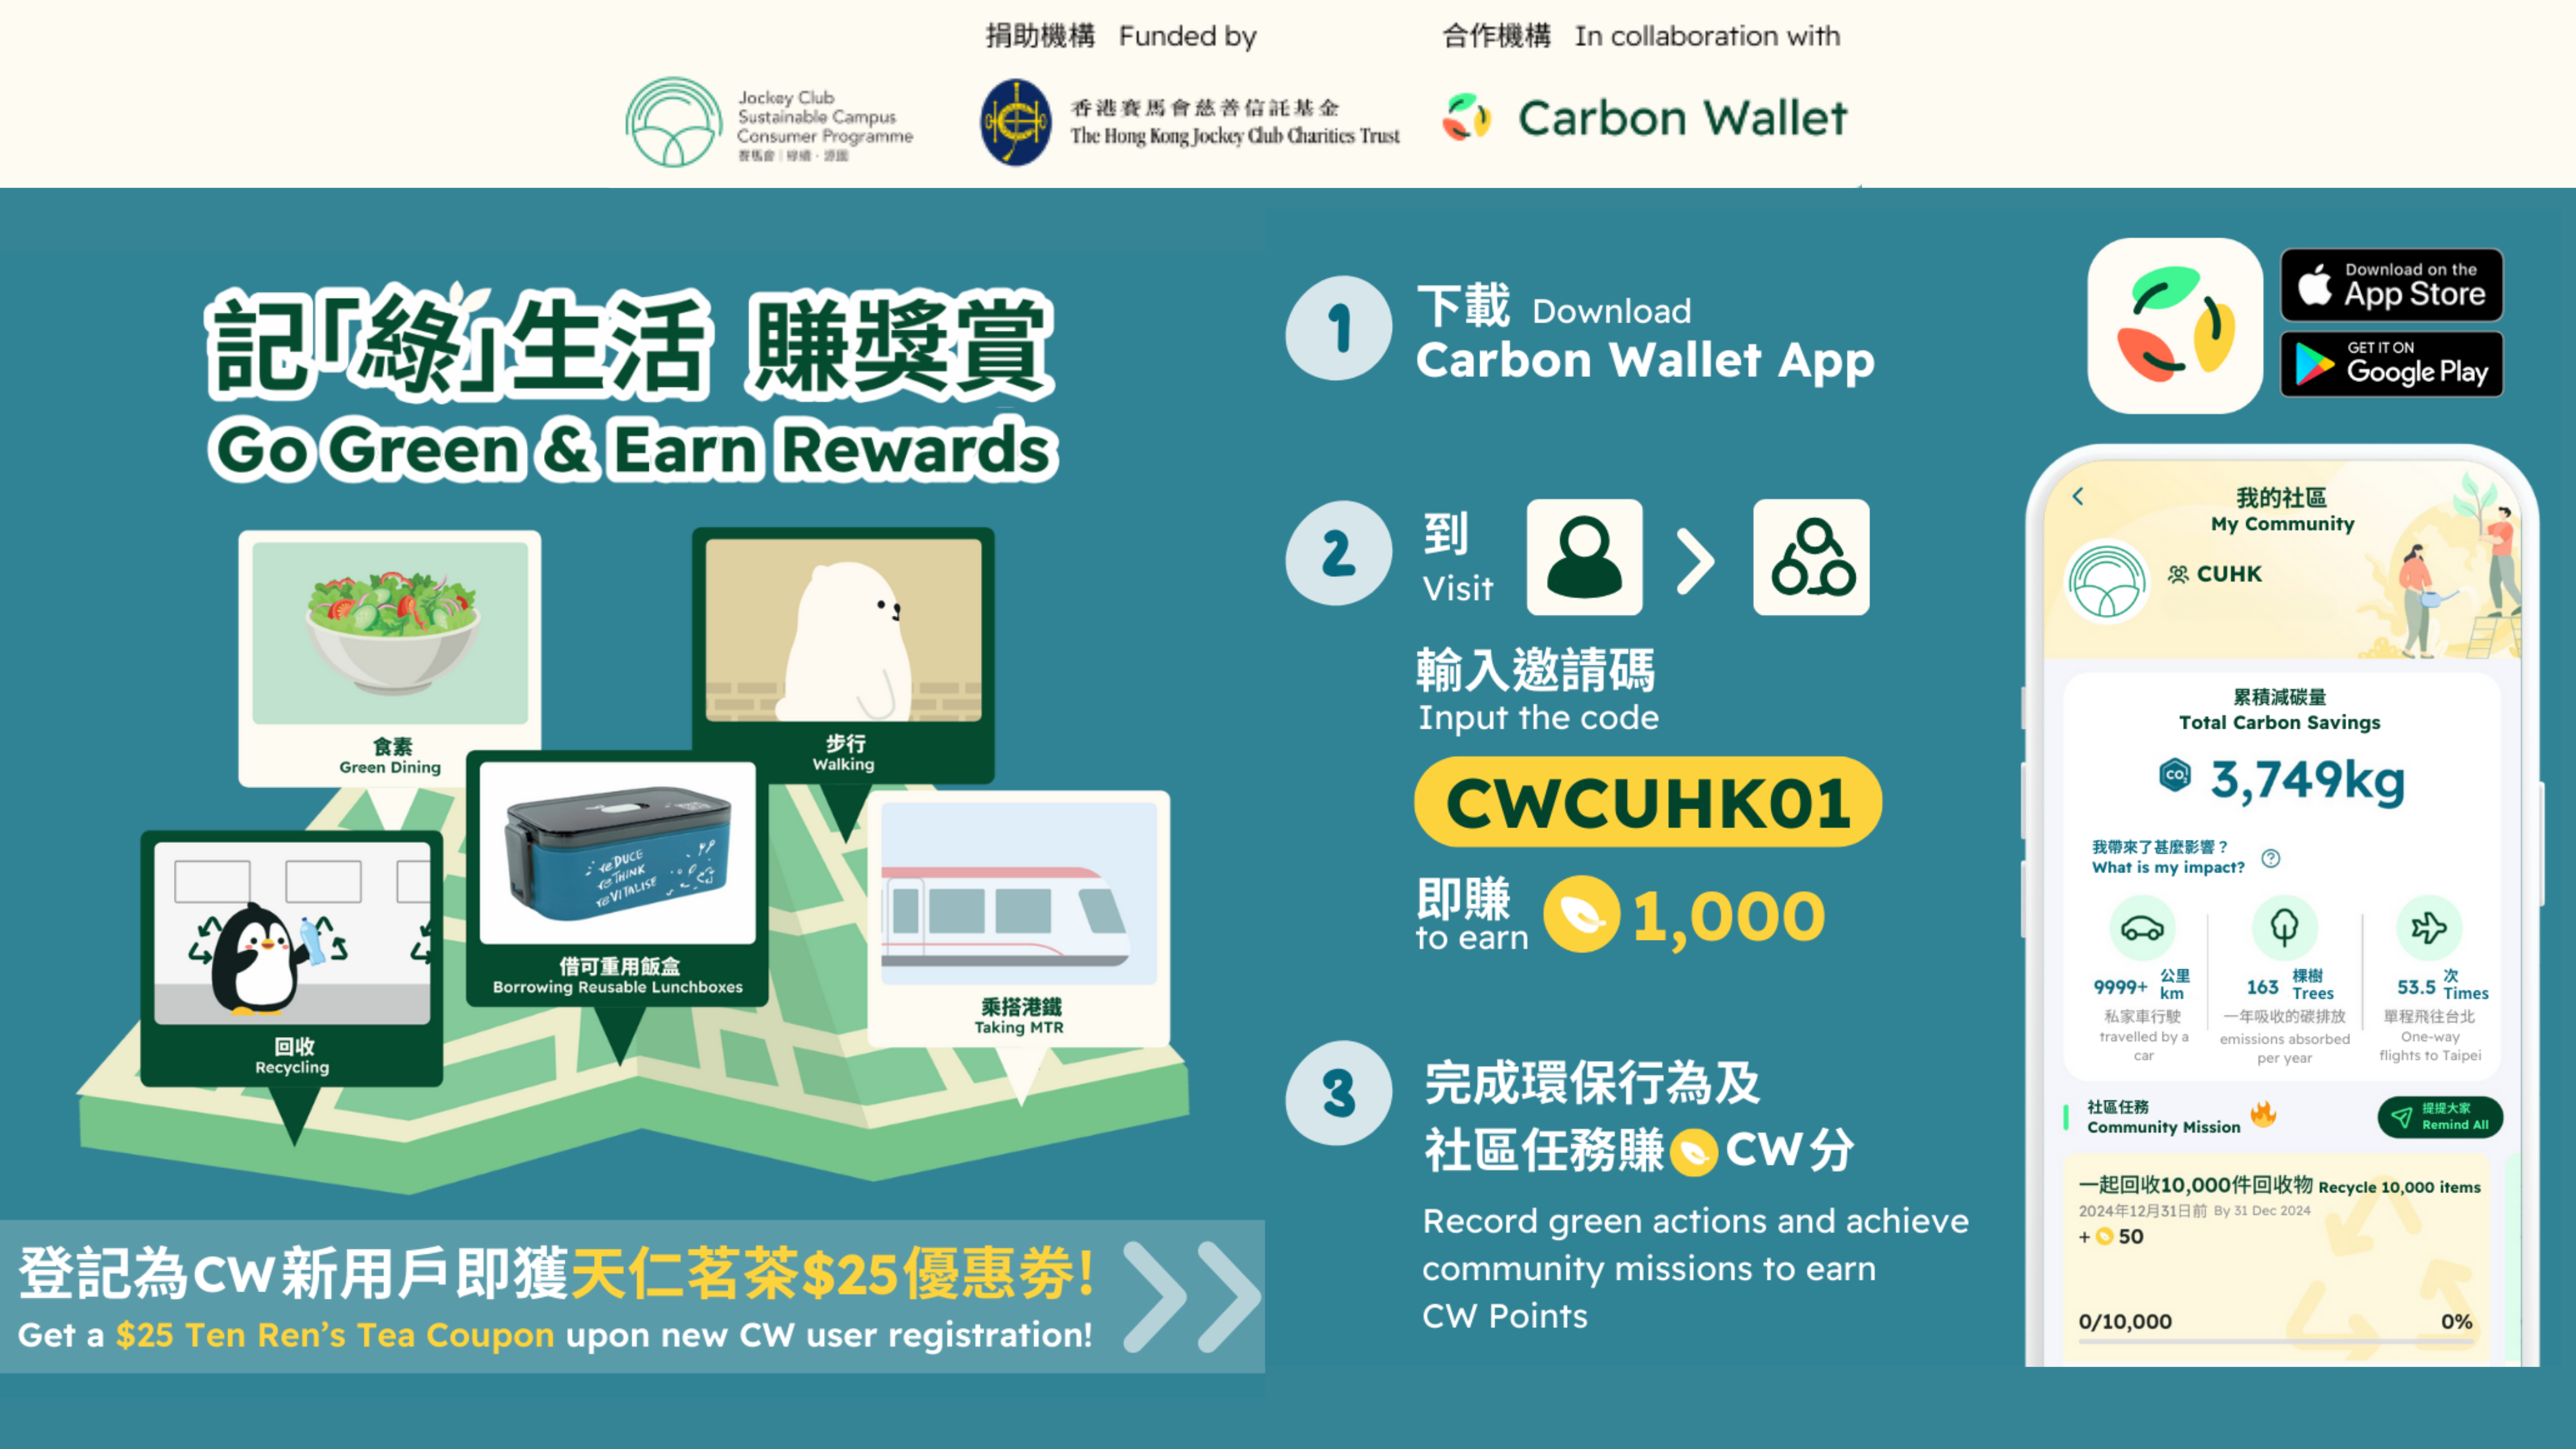 Go Green with Carbon Wallet